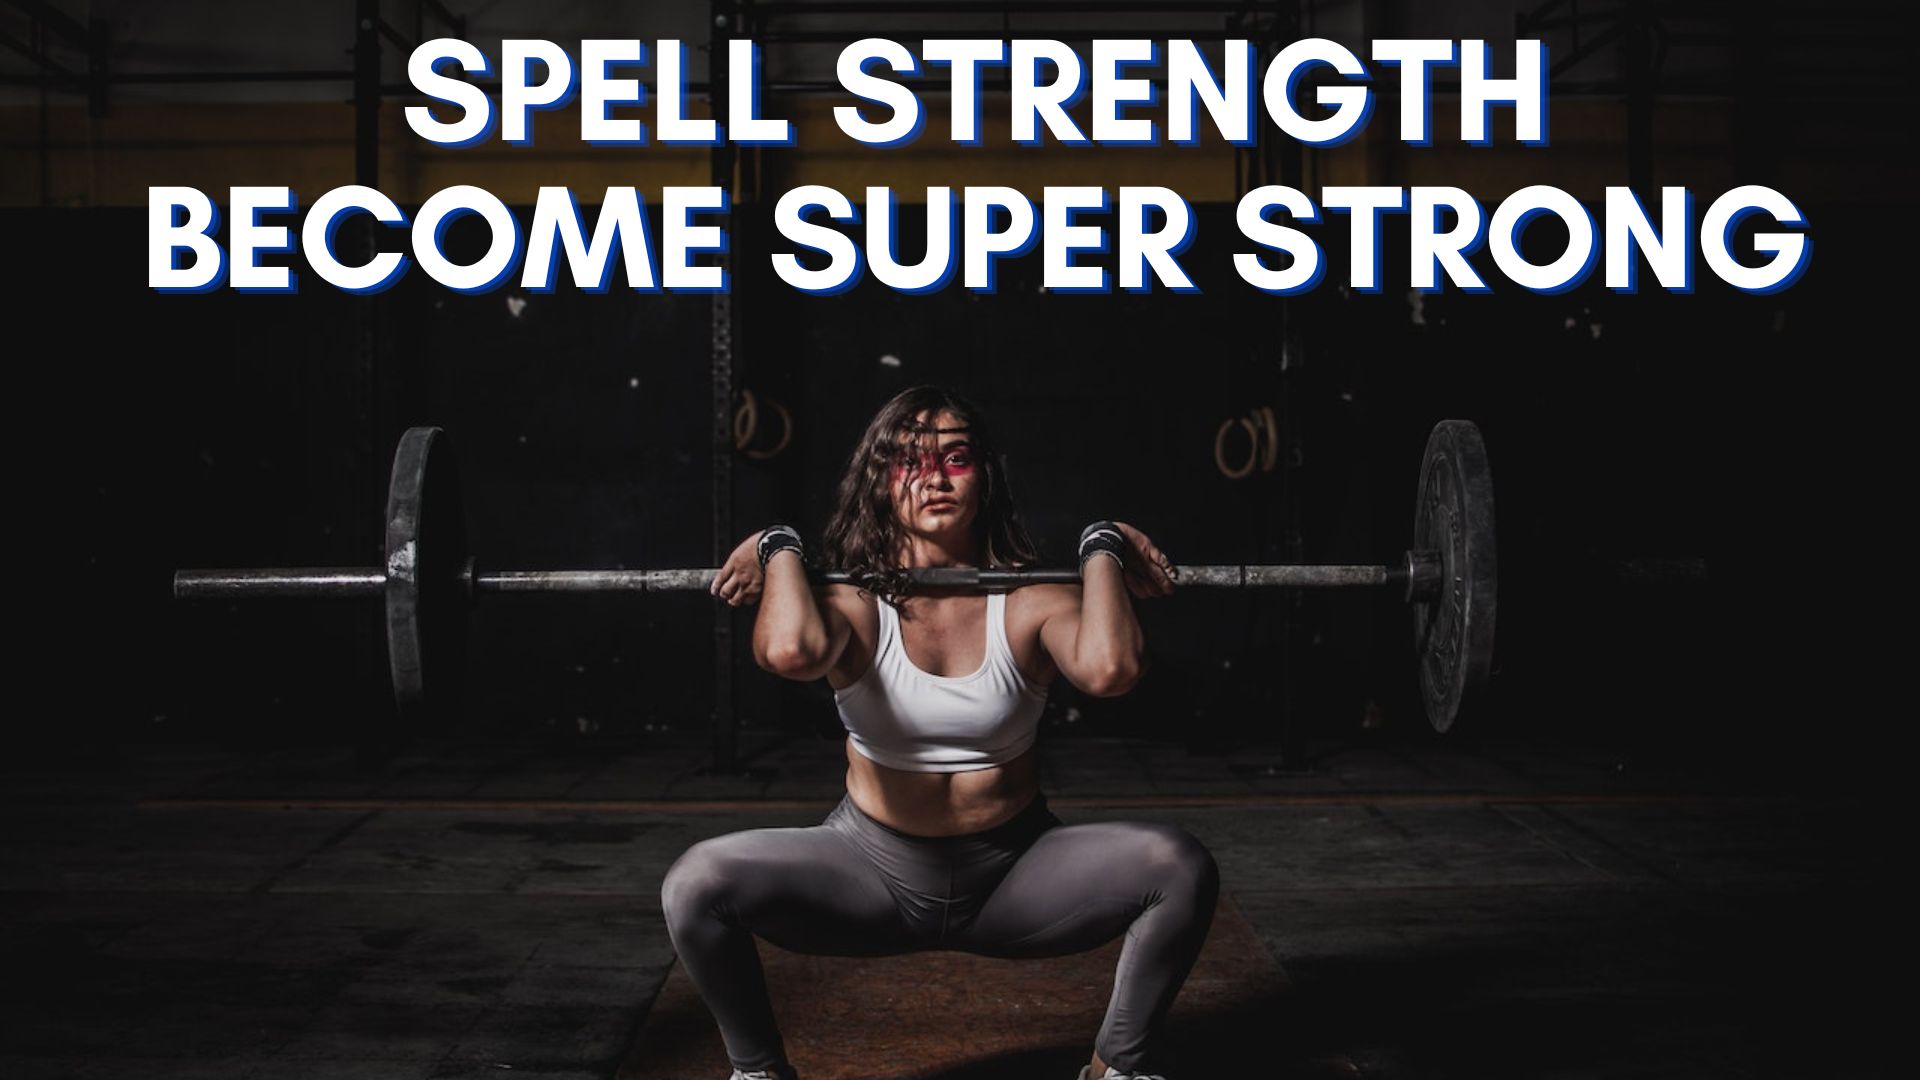 Spell Strength - Use It To Become Super Strong